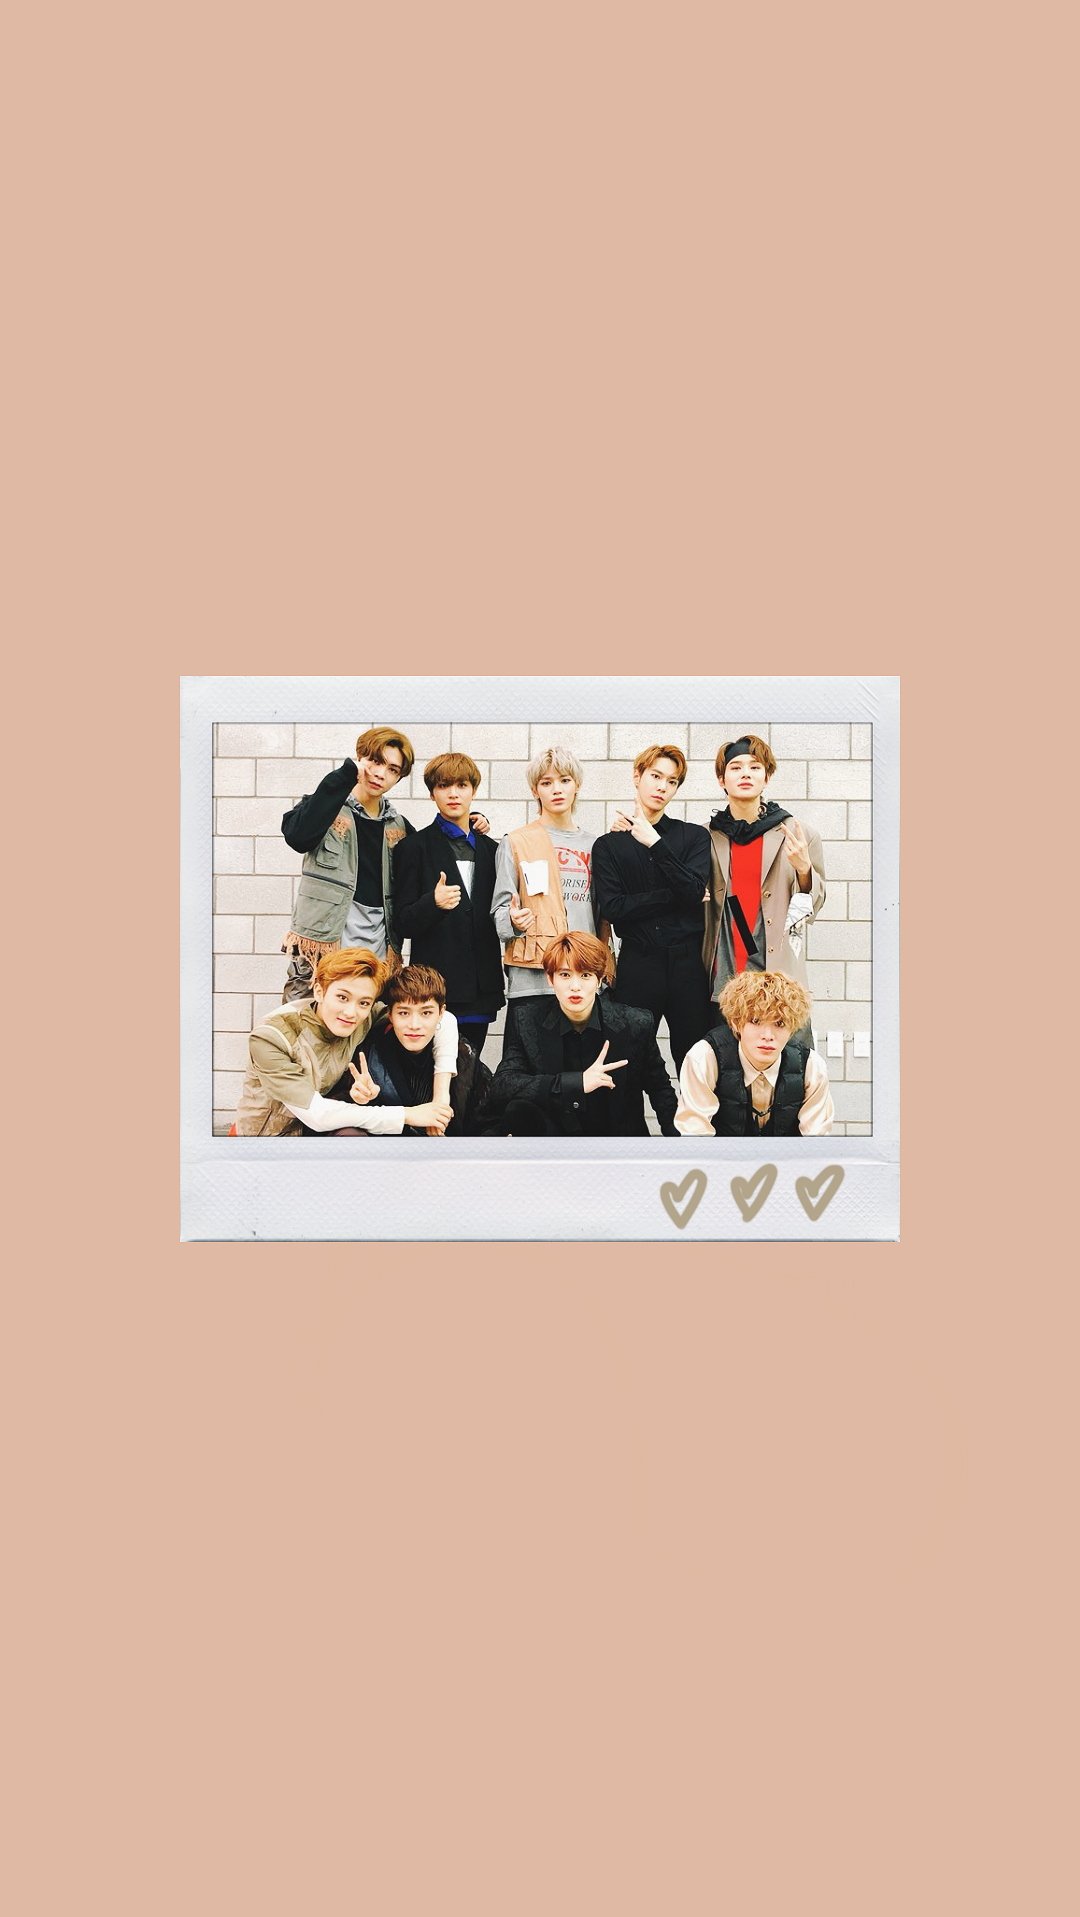 Bts wallpaper with high-resolution 1080x1920 pixel. You can use this wallpaper for your Windows and Mac OS computers as well as your Android and iPhone smartphones - NCT